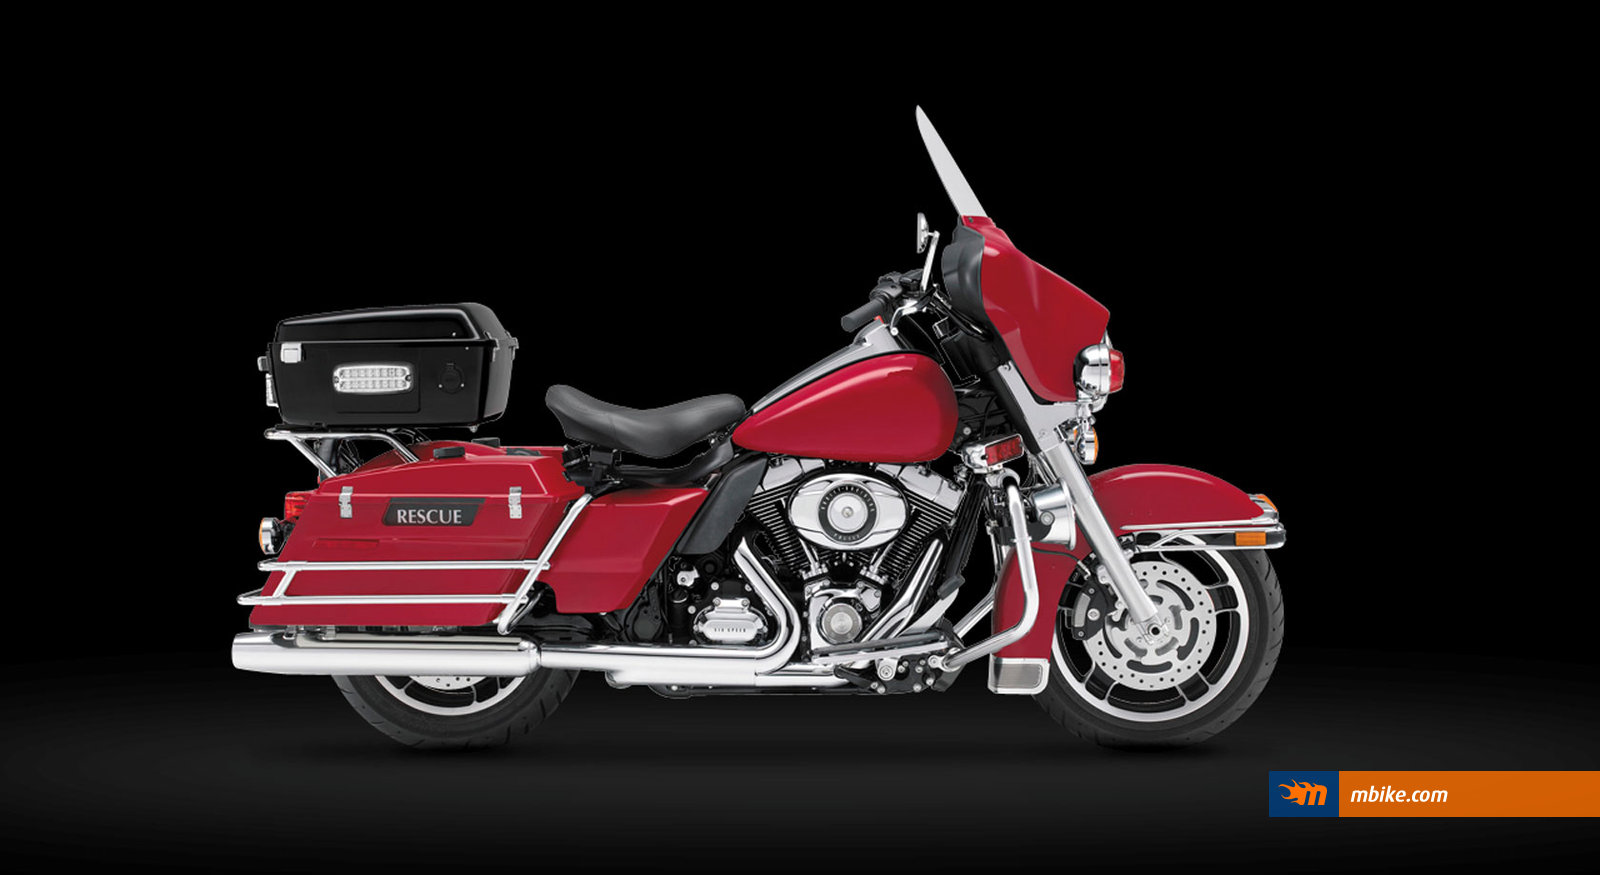 2013 Harley-Davidson FLHP Road King Fire/Rescue